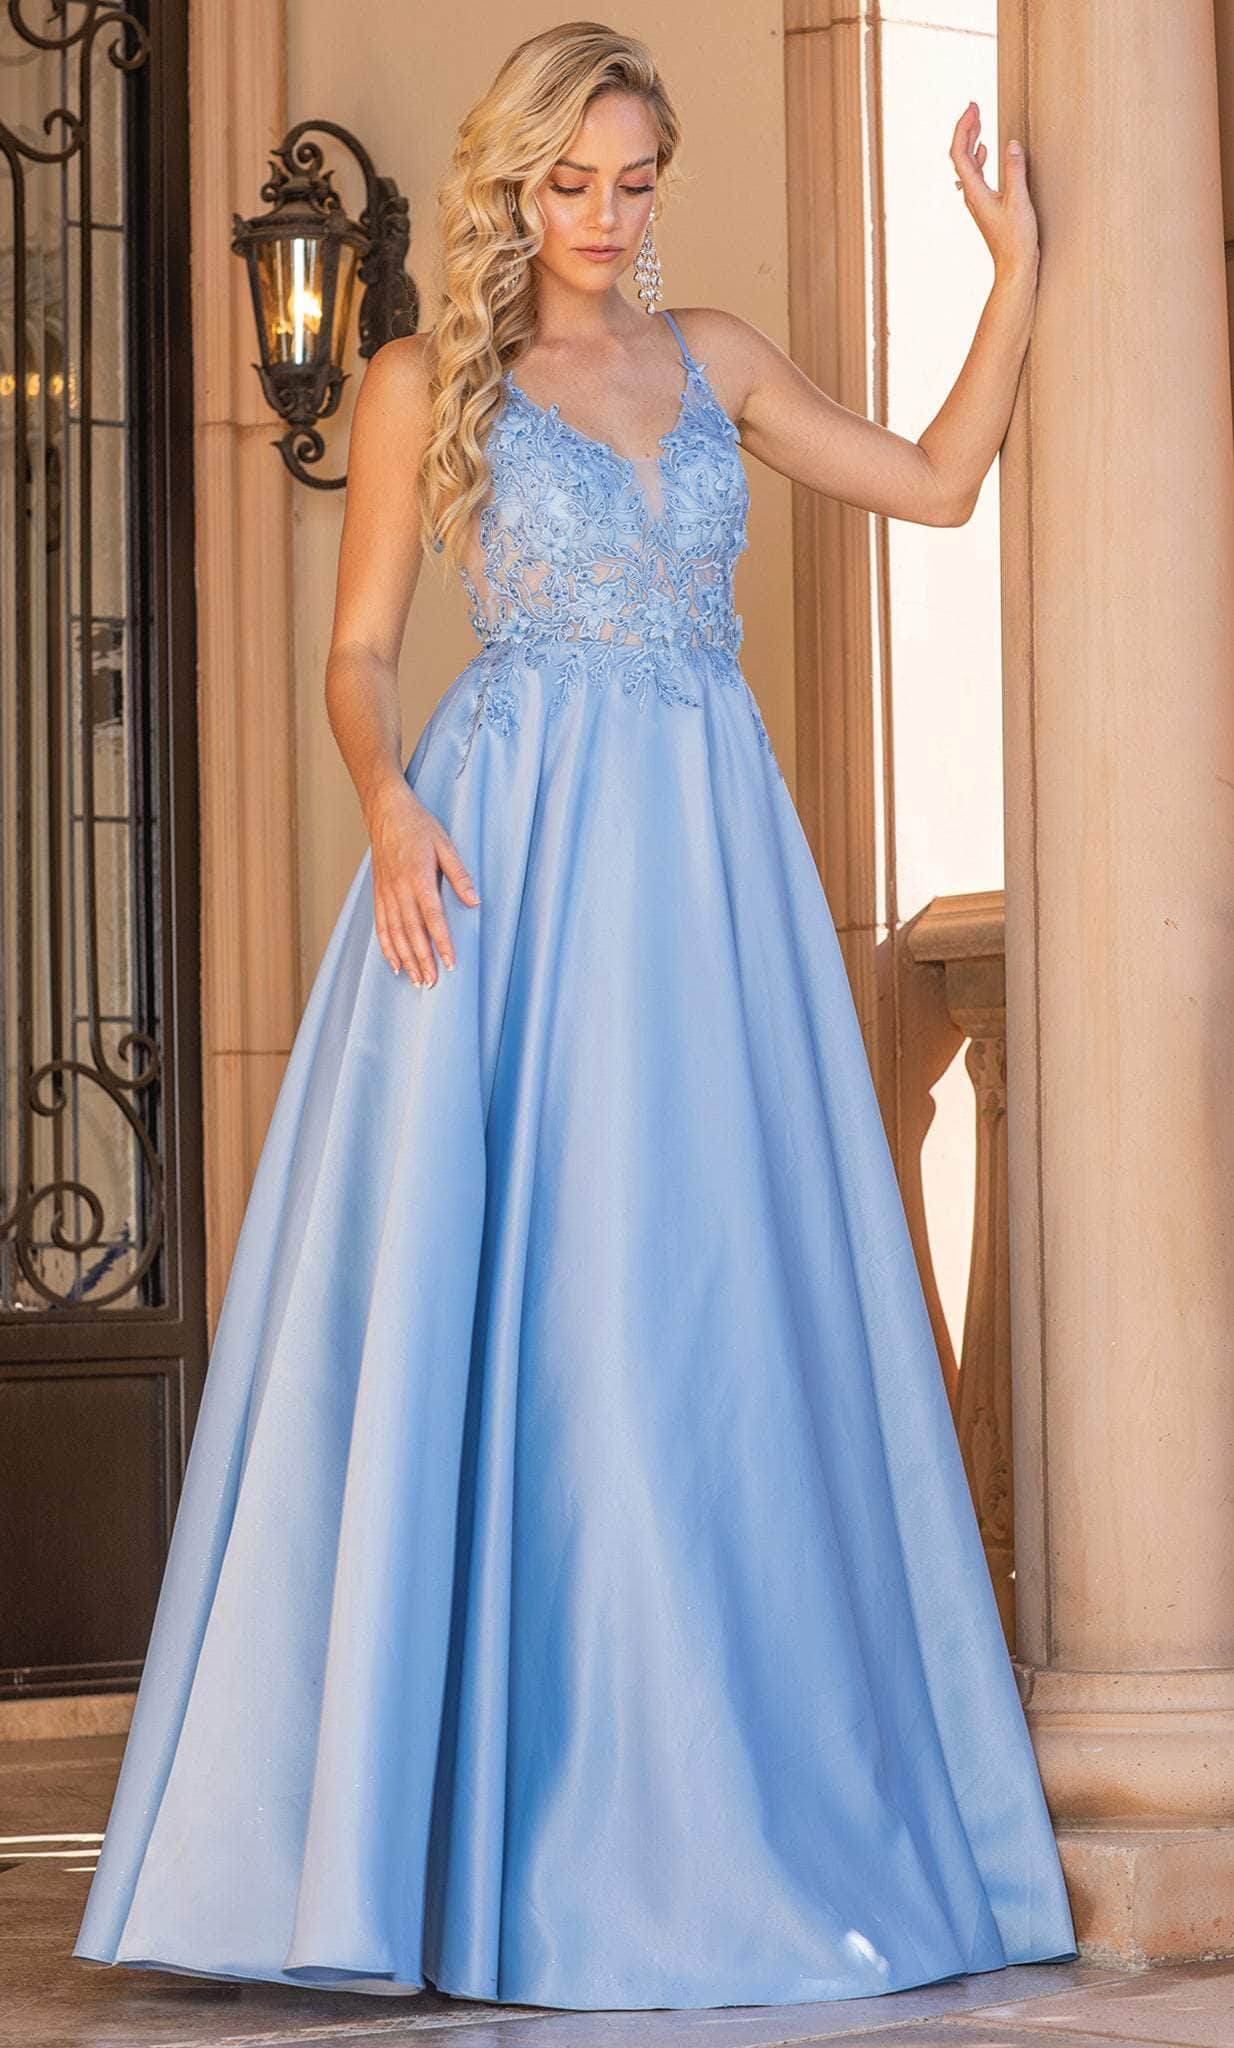 Image of Dancing Queen 4326 - Lace Appliqued V-Neck Prom Gown